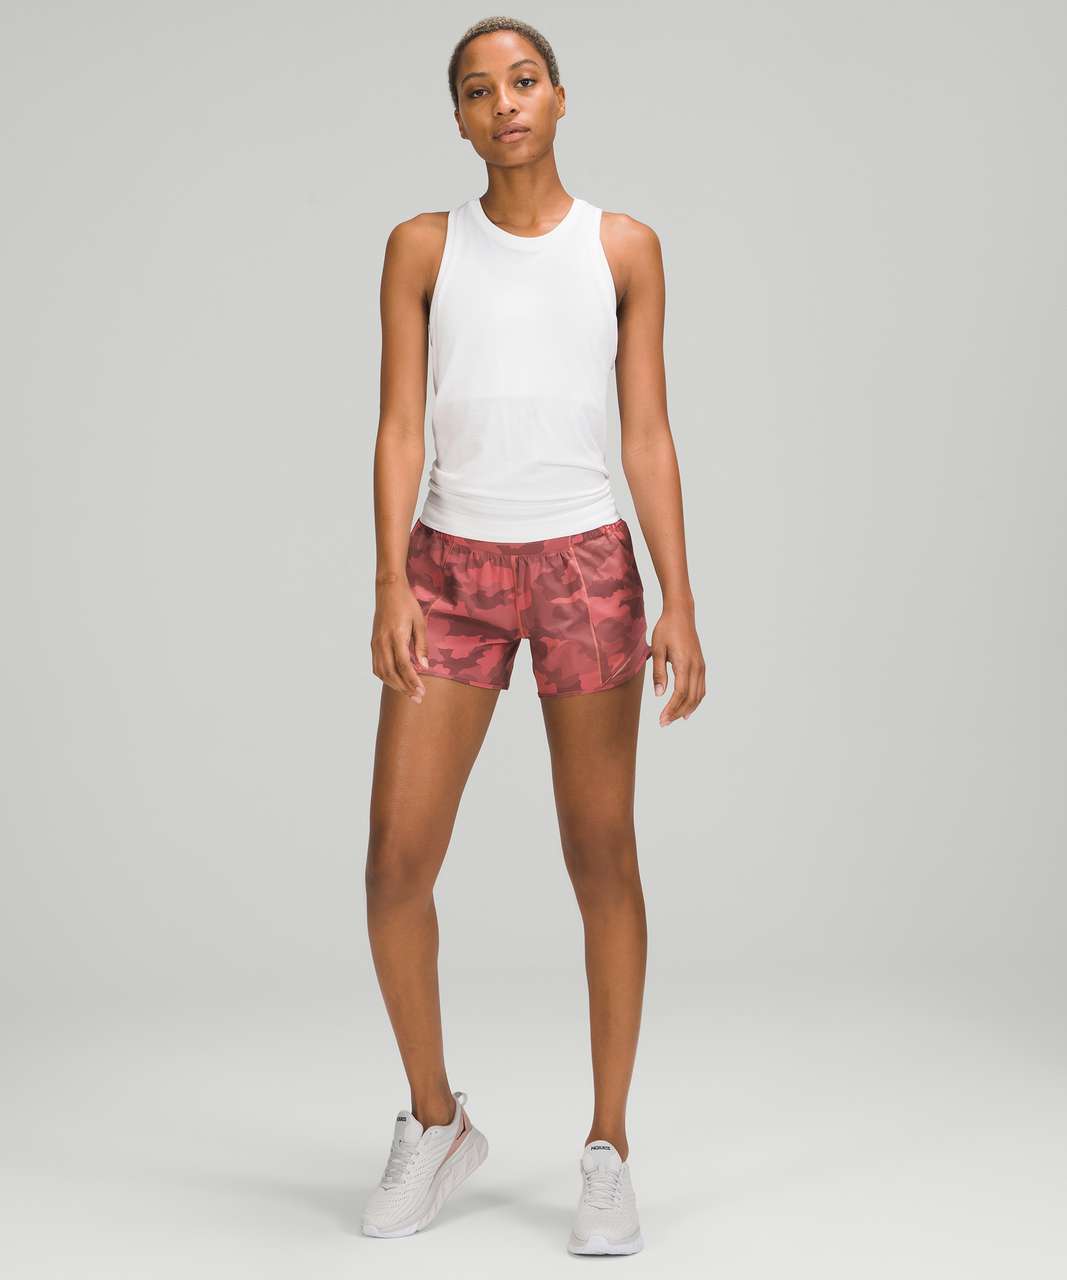 Lululemon Hotty Hot Low Rise Short 4" - Heritage 365 Camo Brier Rose Multi / Spiced Chai